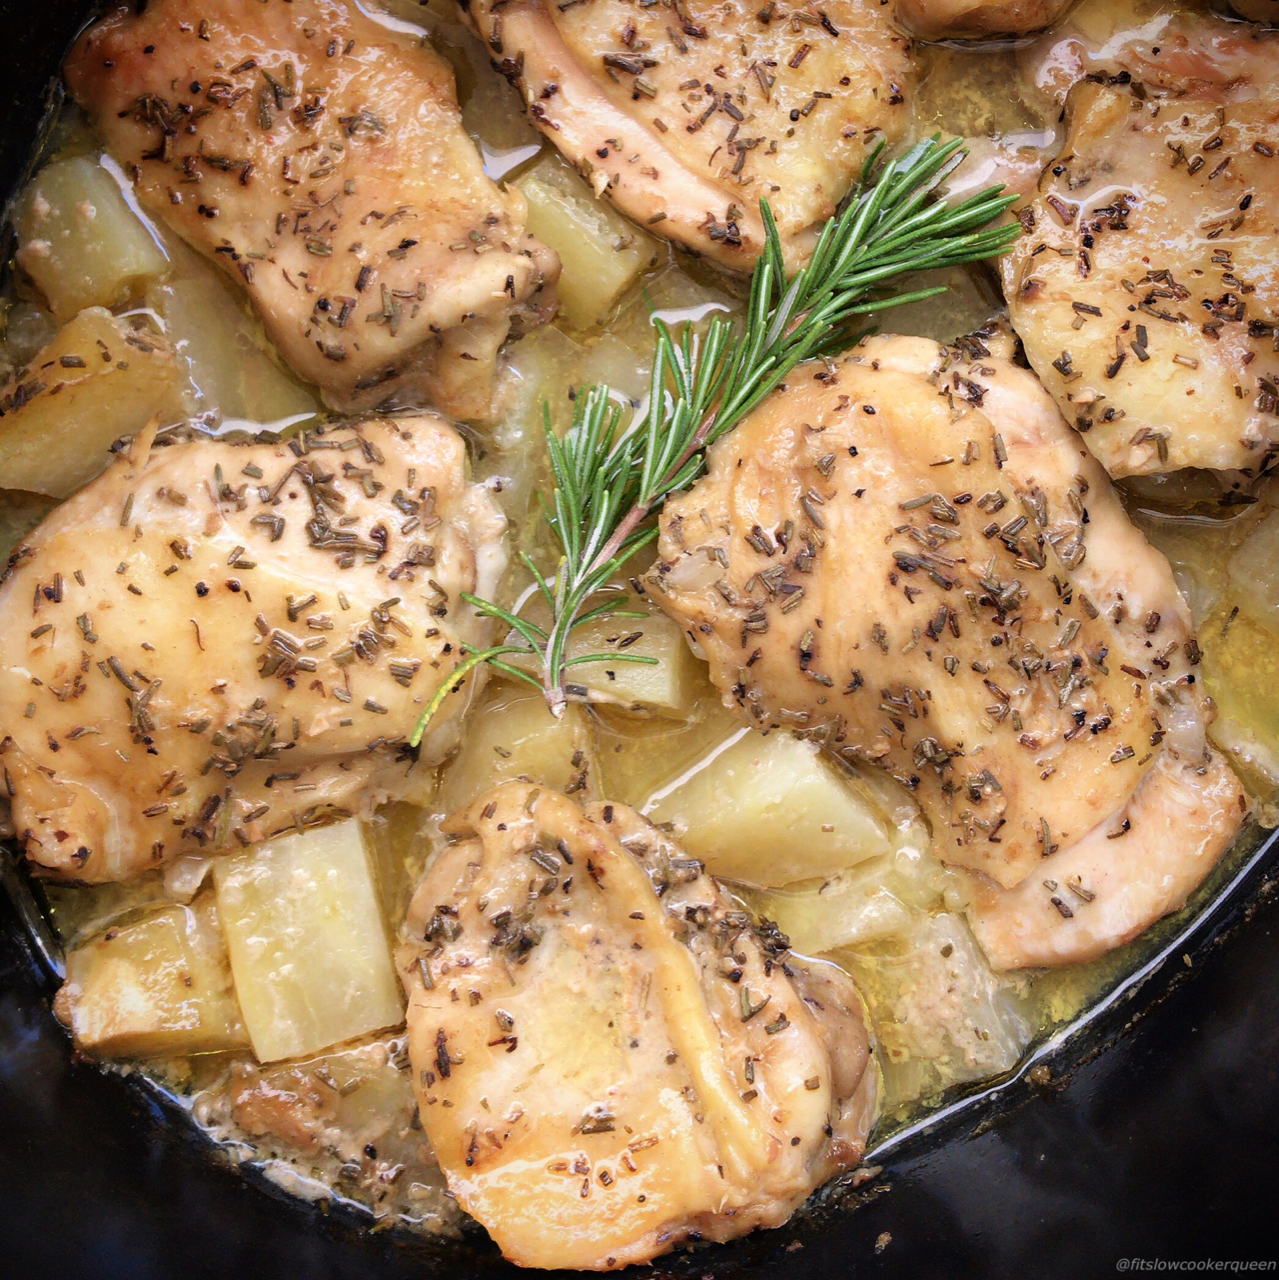 A homemade rosemary dijon sauce cooks on top of chicken and your preferred potato in this easy and healthy slow cooker recipe.